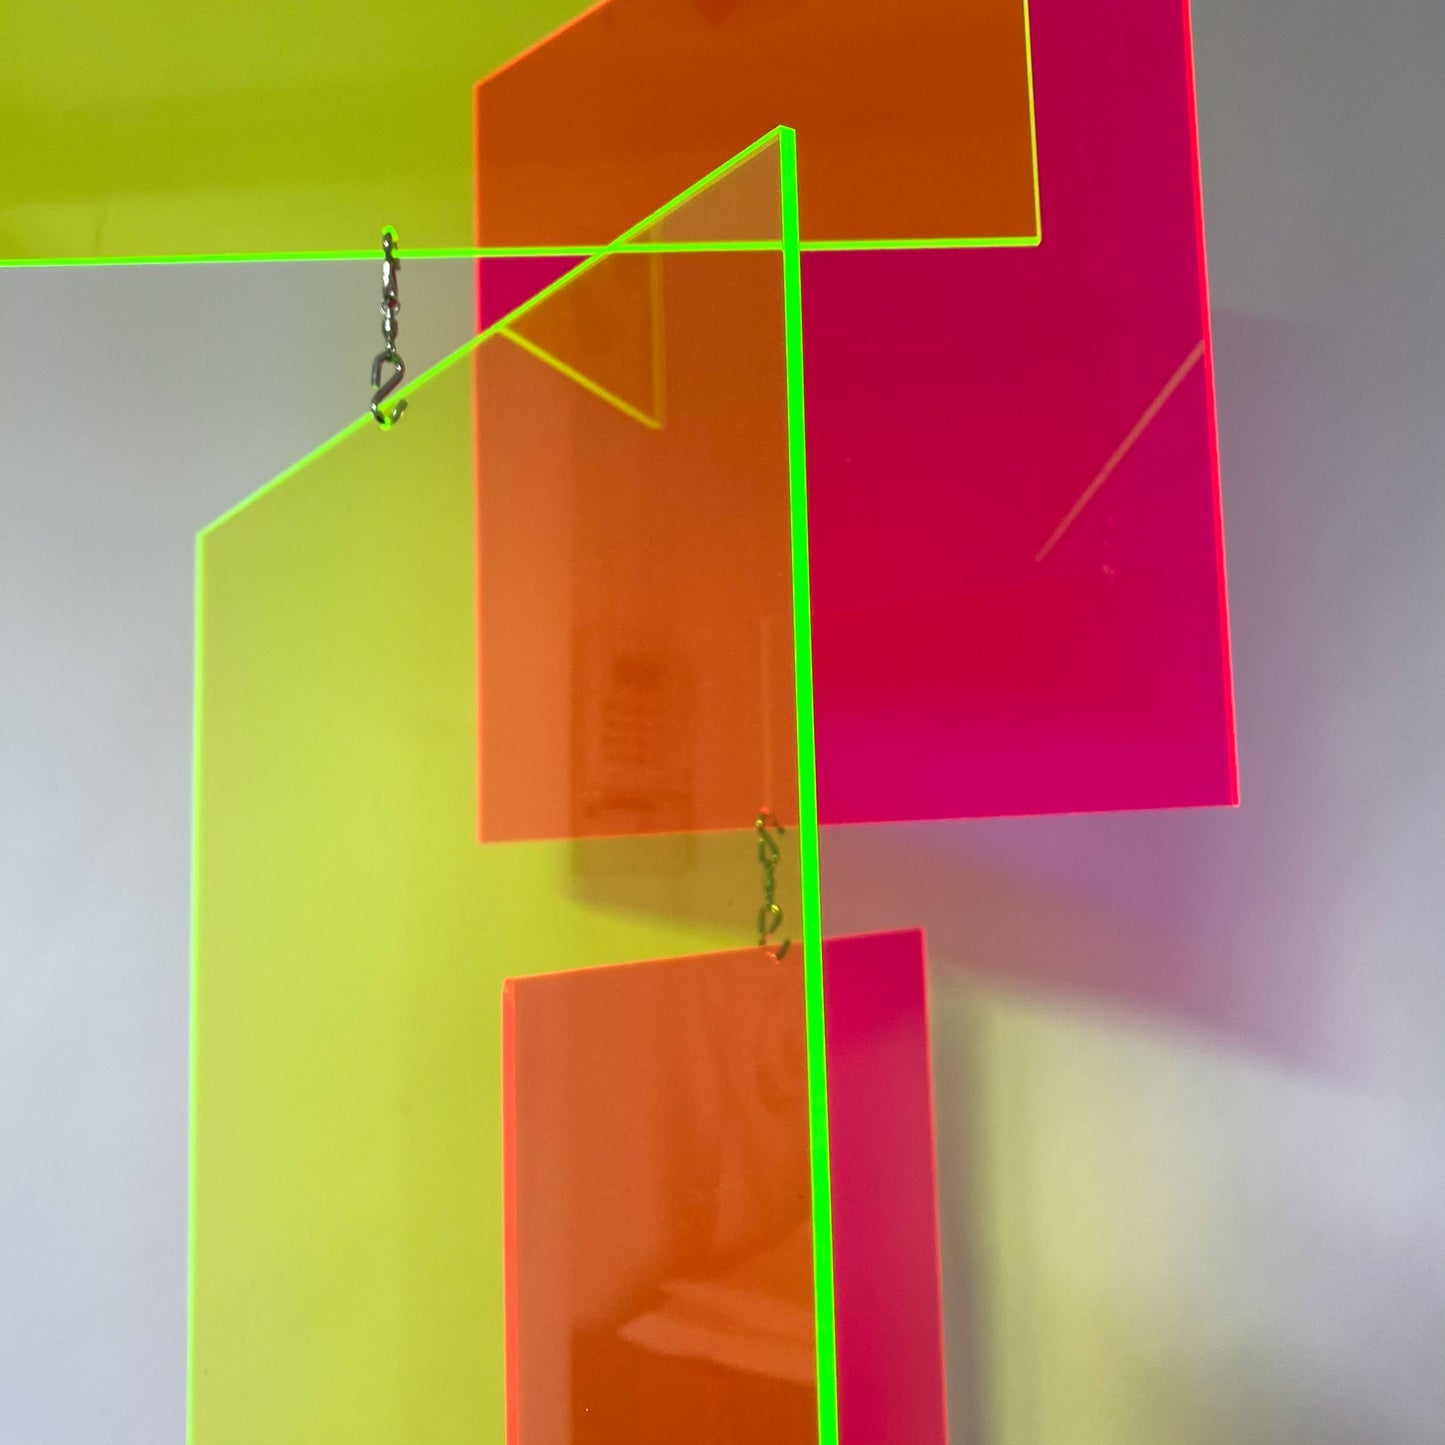 Closeup view of neon fluorescent pink and green kinetic hanging art mobiles by AtomicMobiles.com with edges glowing